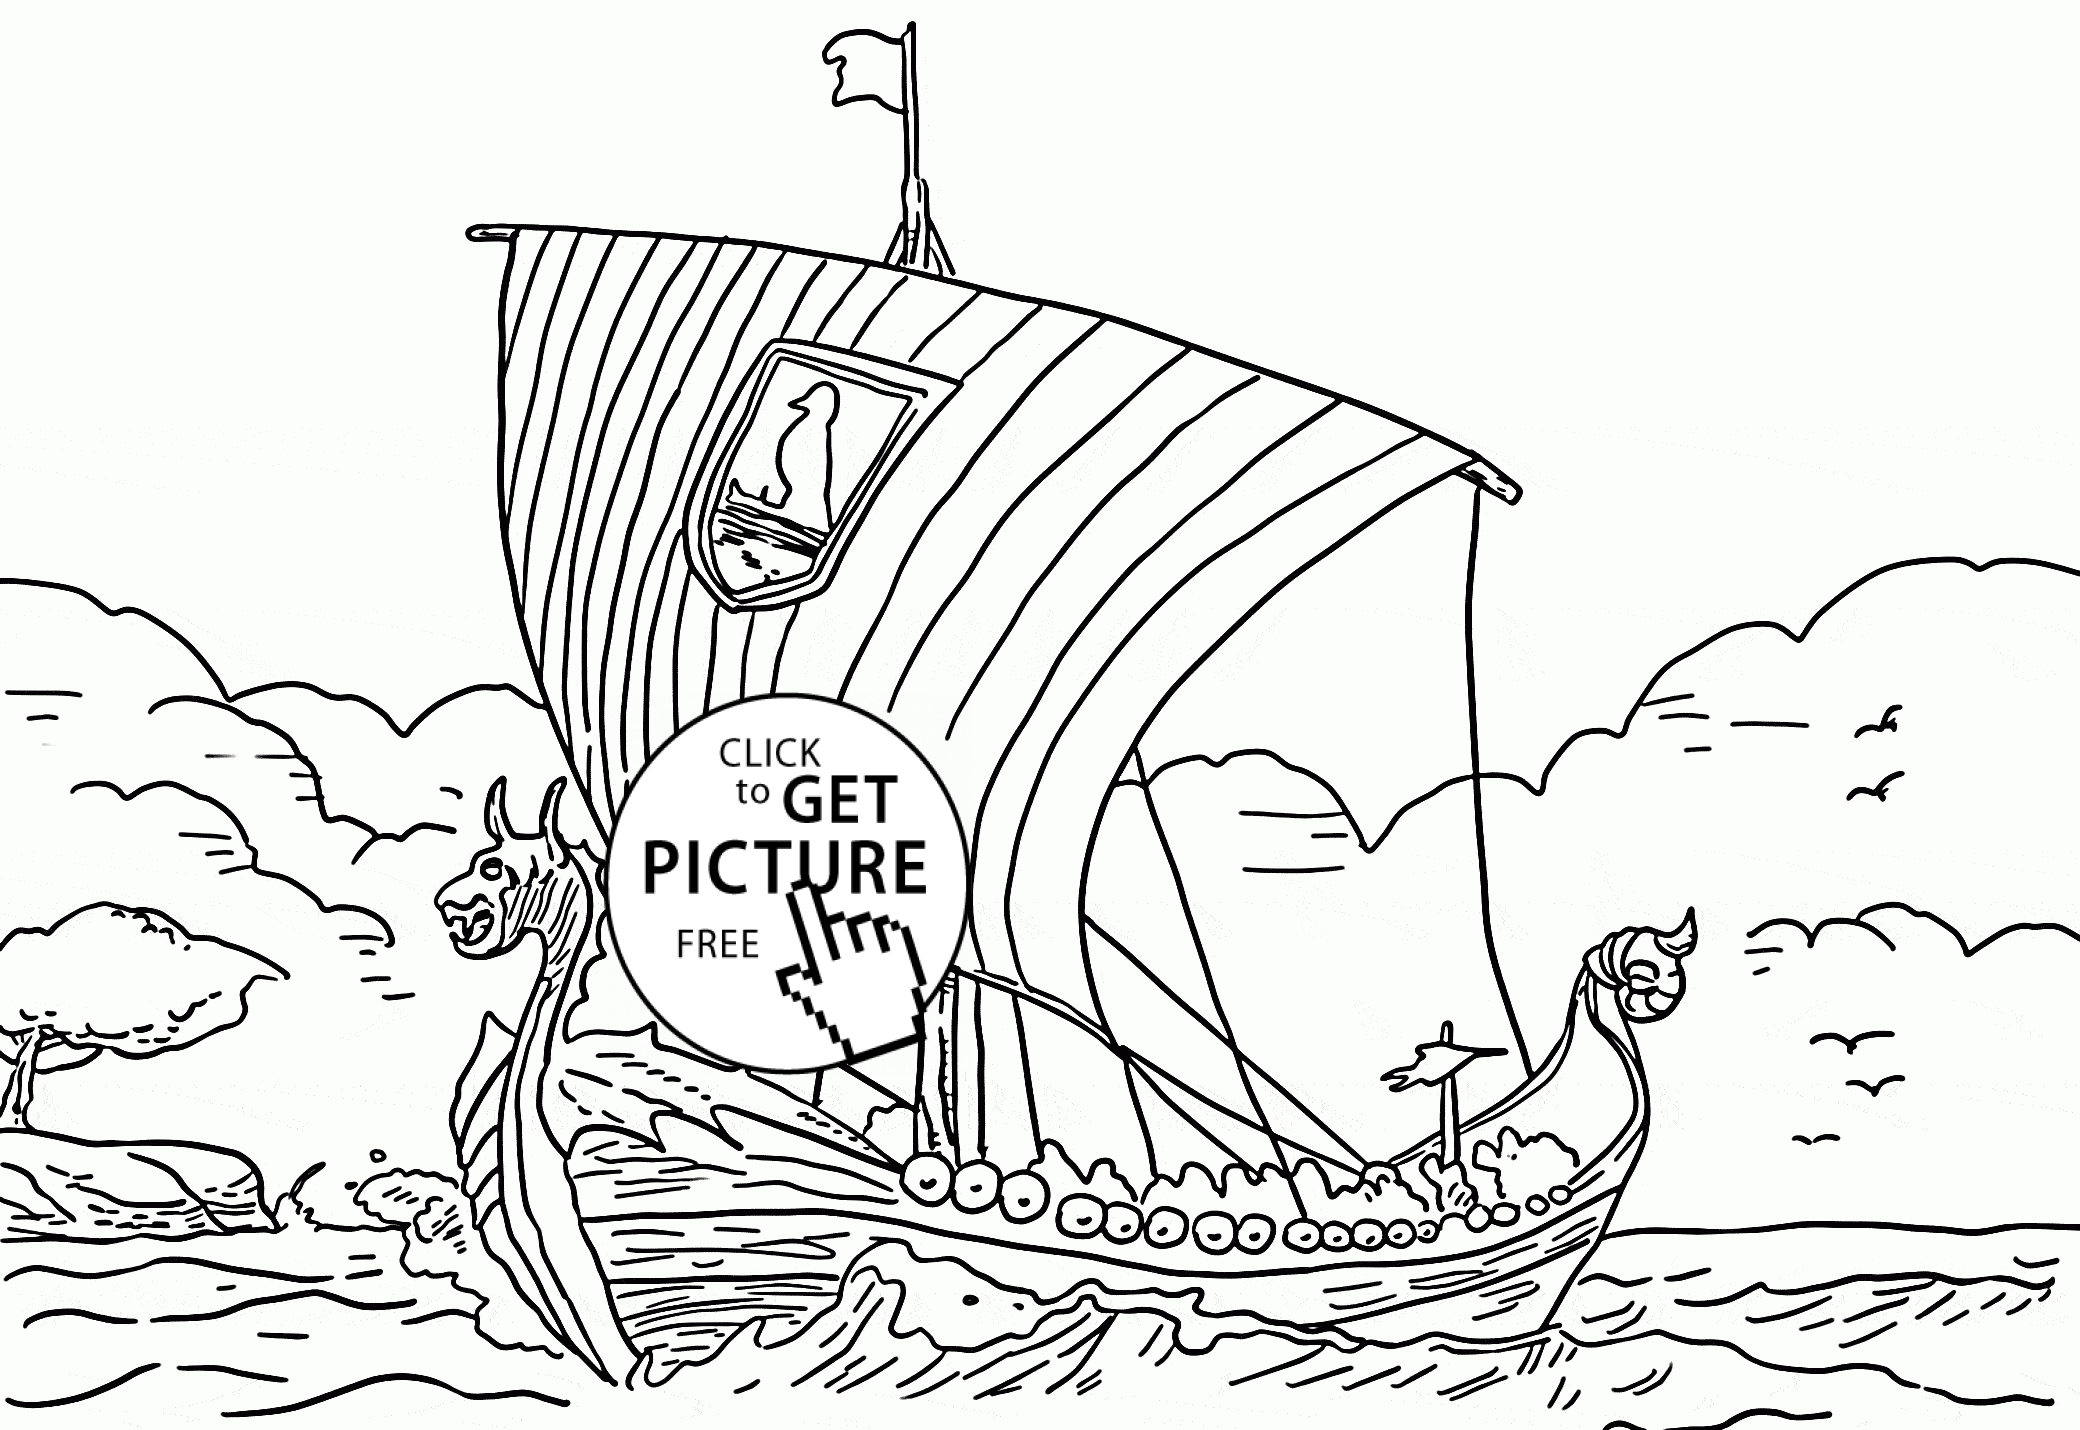 Viking Ship coloring page for kids, transportation coloring pages ...